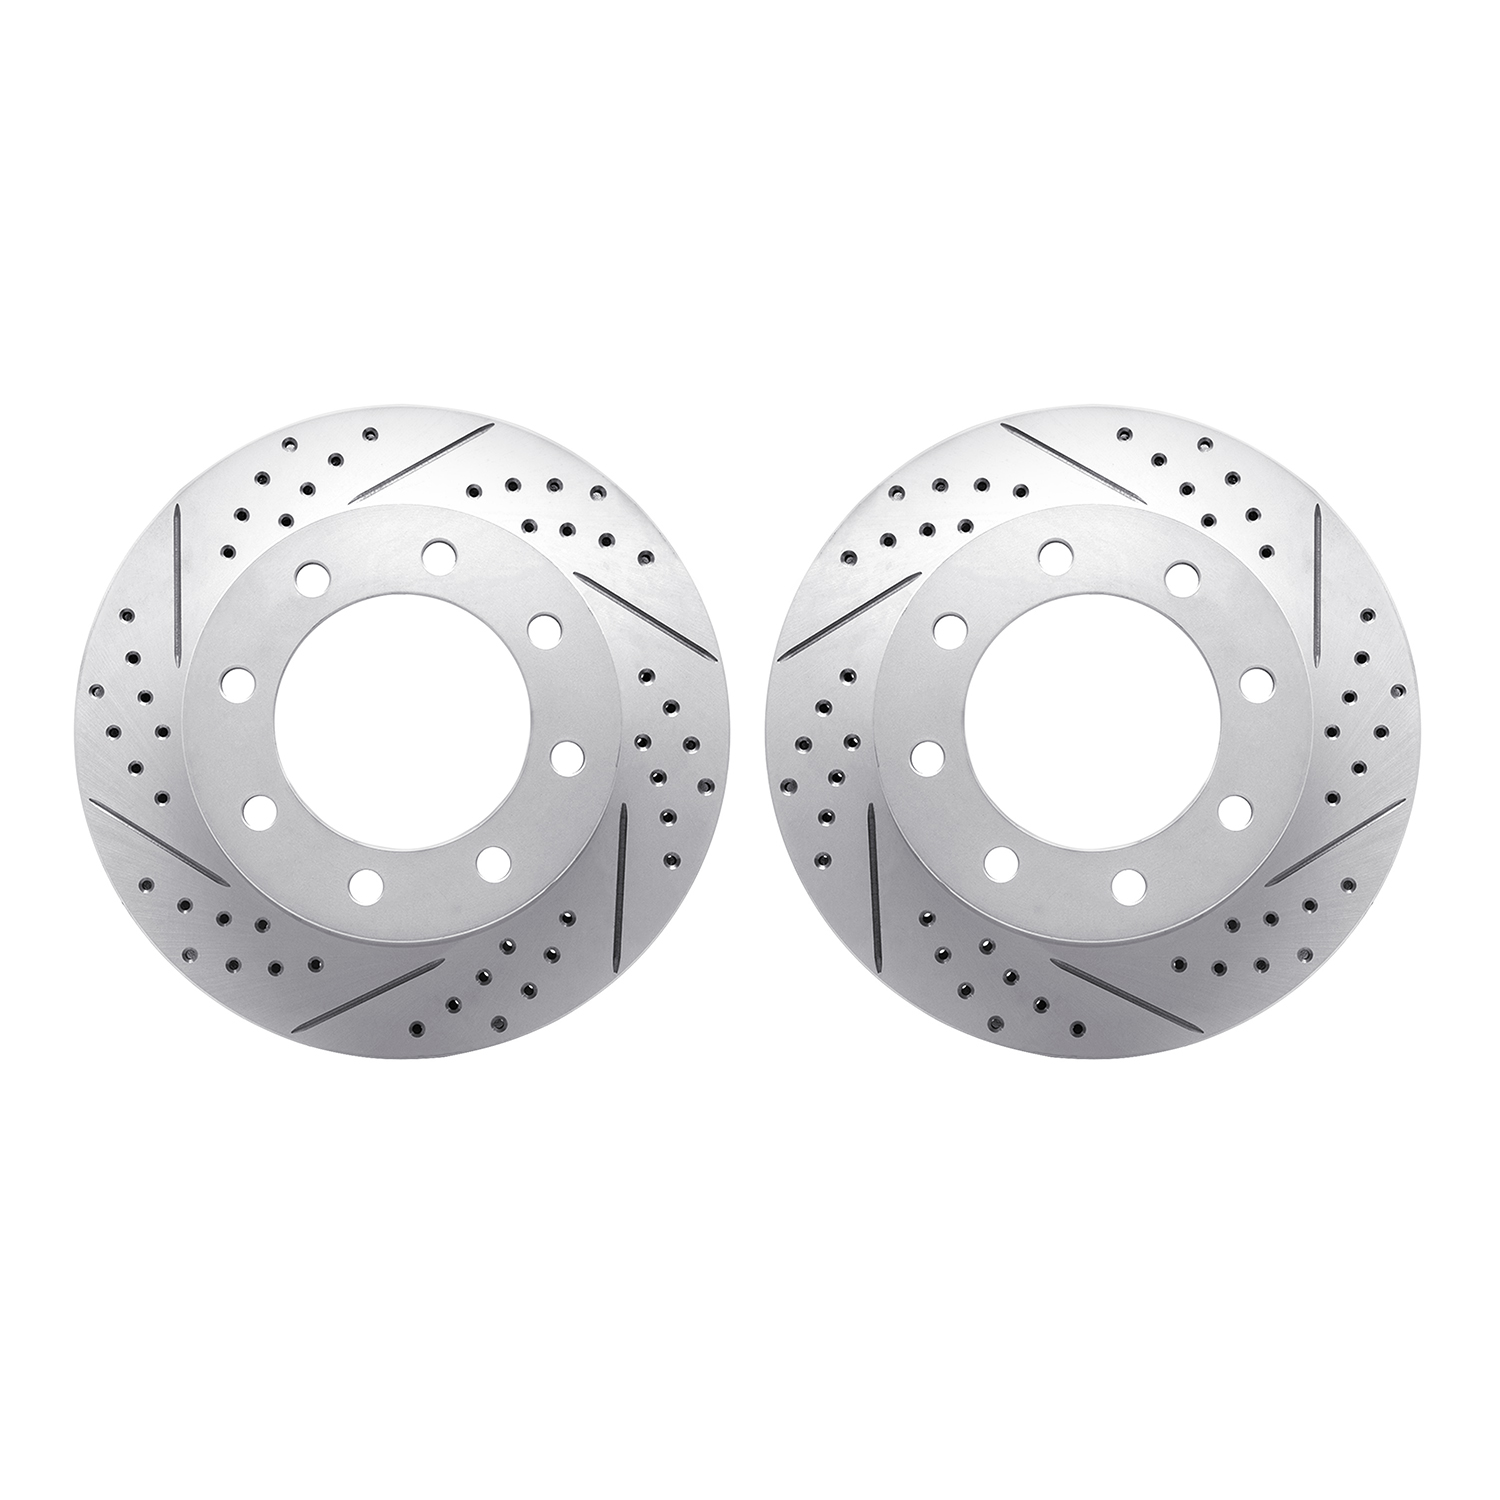 2002-54066 Geoperformance Drilled/Slotted Brake Rotors, 2005-2012 Ford/Lincoln/Mercury/Mazda, Position: Front